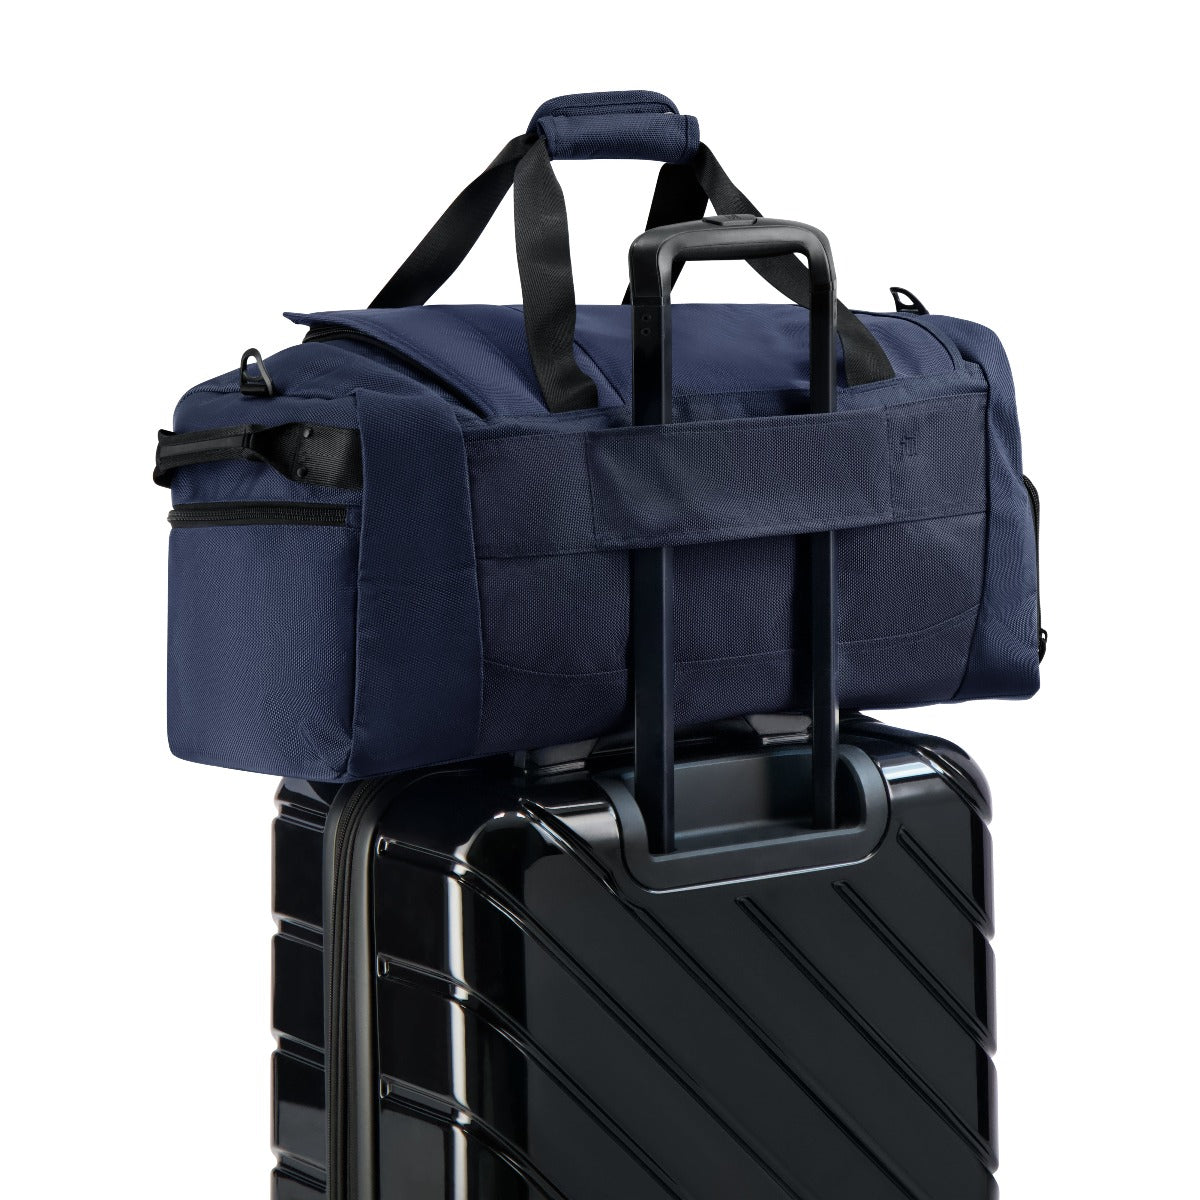 ful tactics collection siege duffle bag navy blue - best travelling duffel bags